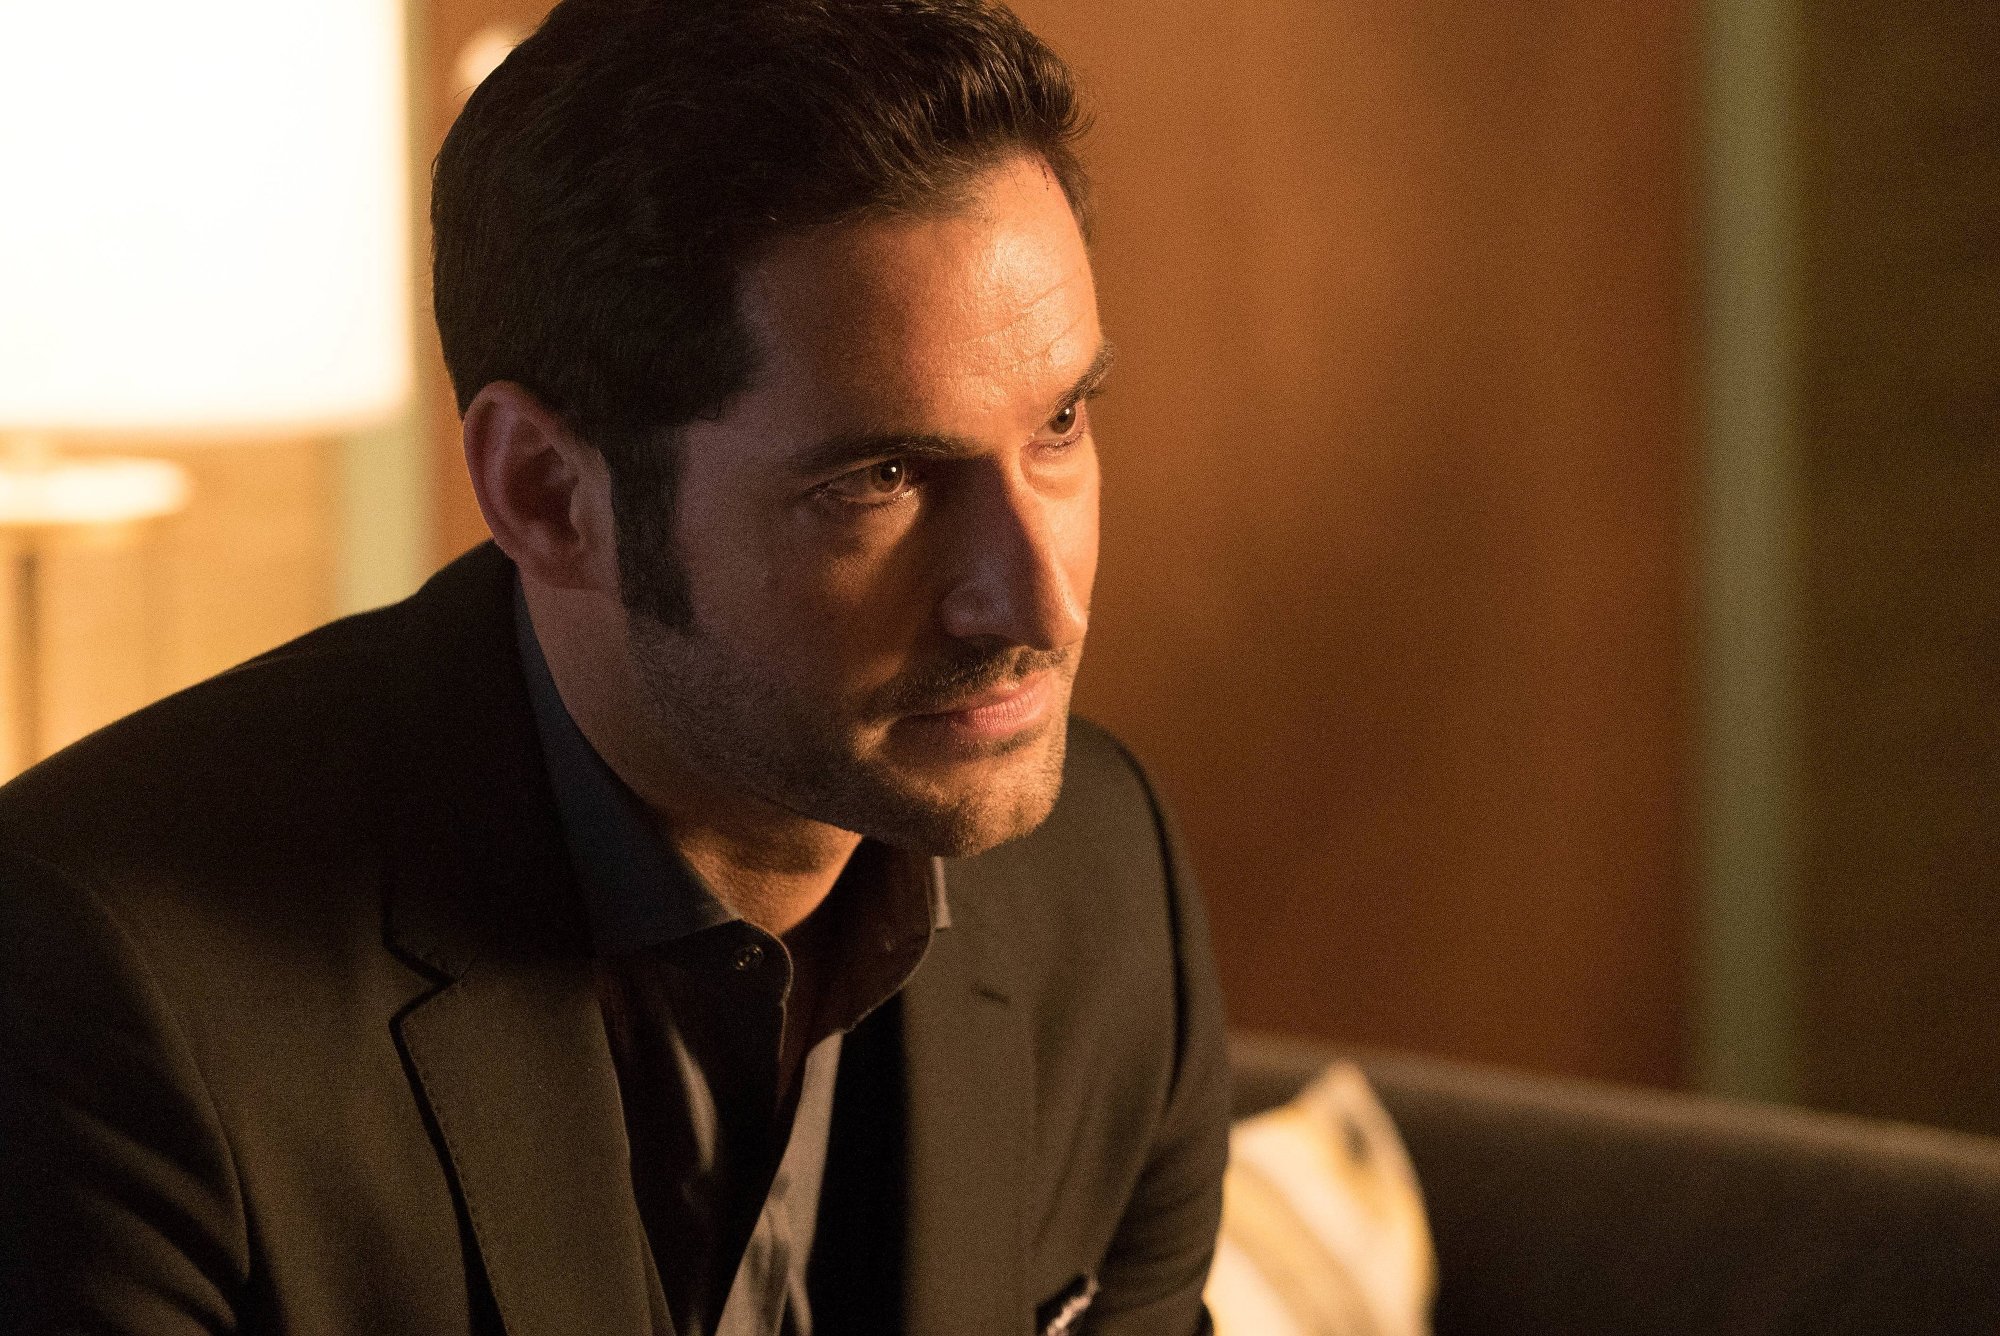 Tom Ellis, who 'Fantastic Four' fans want in the cast as Doctor Doom. He's wearing a black suit and looking intensely in front of him with a lamp in the background.